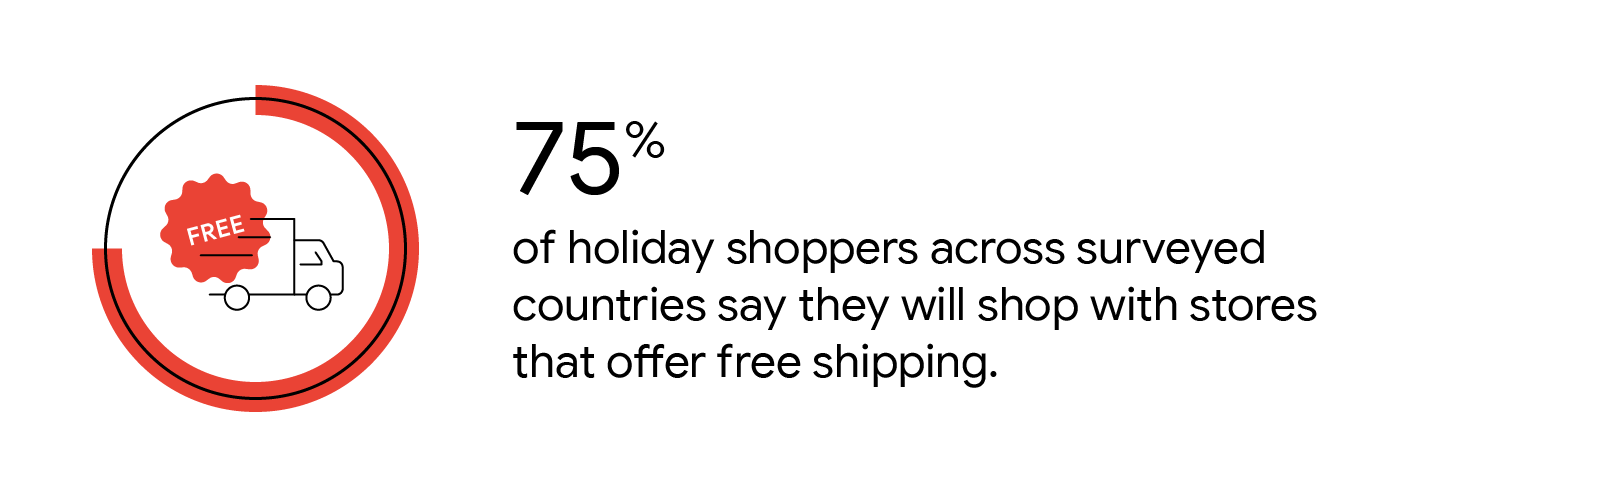 A box truck with a FREE stamp inside a red circle graph. 75% of holiday shoppers across surveyed countries say they will shop with stores that offer free shipping.